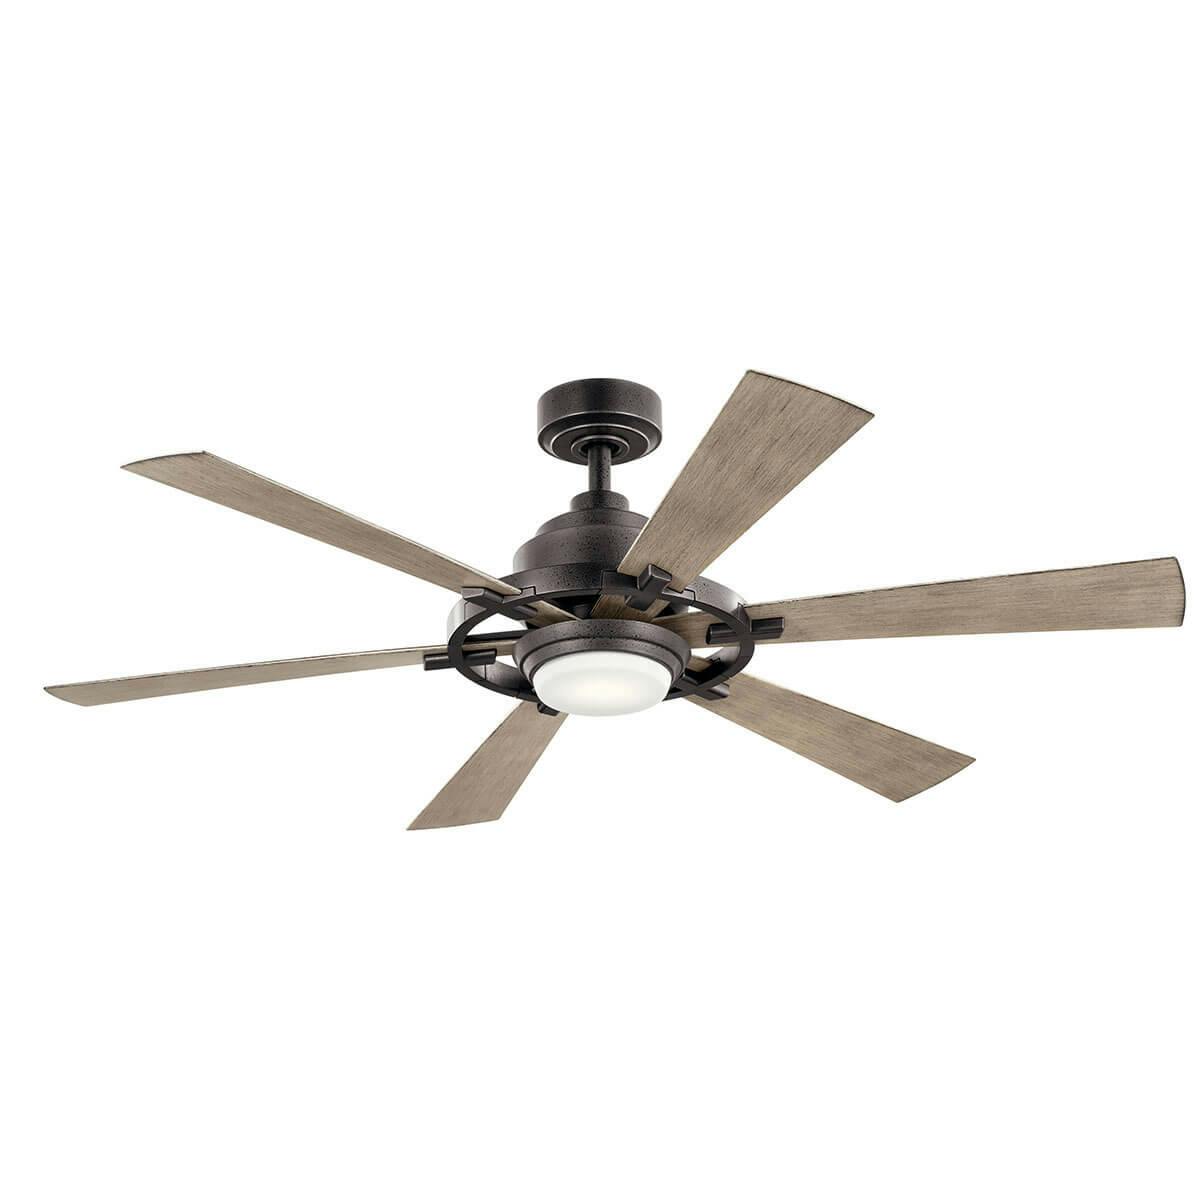 Gentry Lite 52" LED Ceiling Fan Anvil Iron on a white background